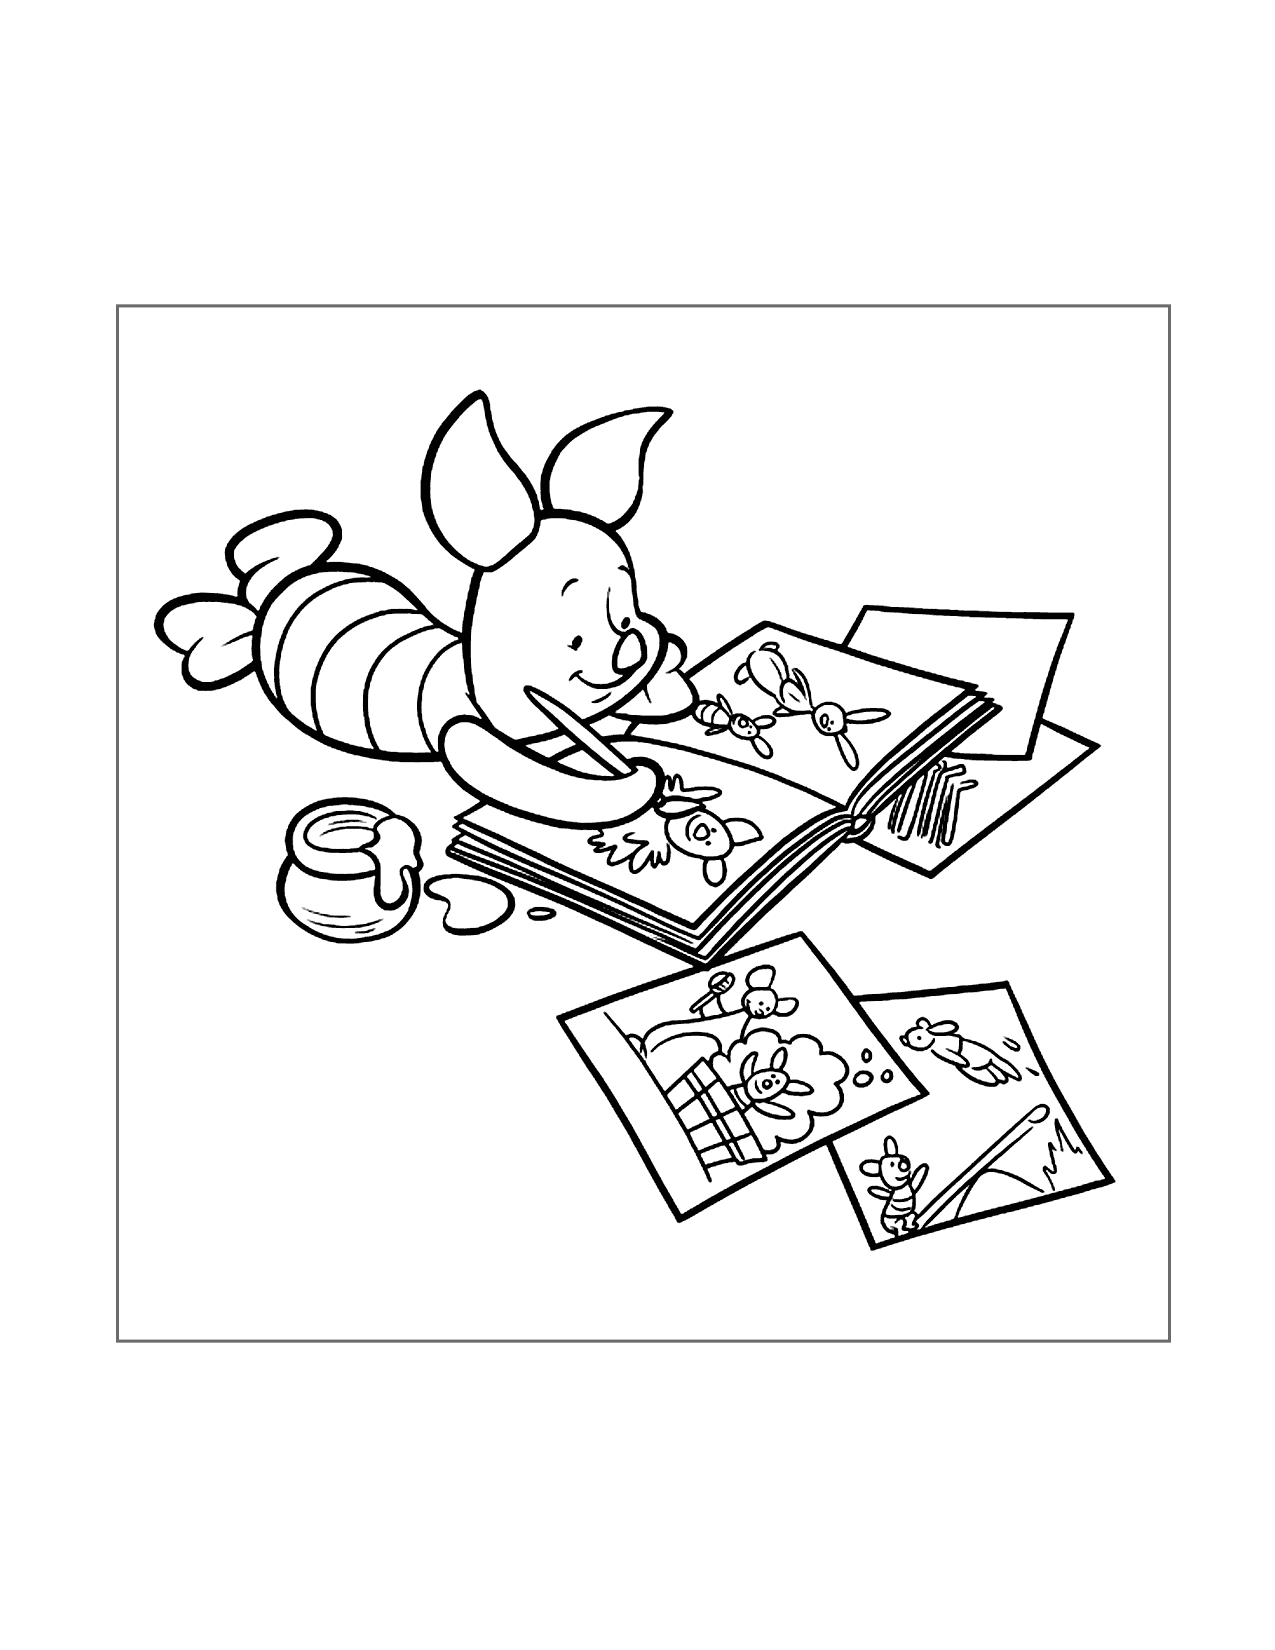 Piglet Is Coloring Sheet